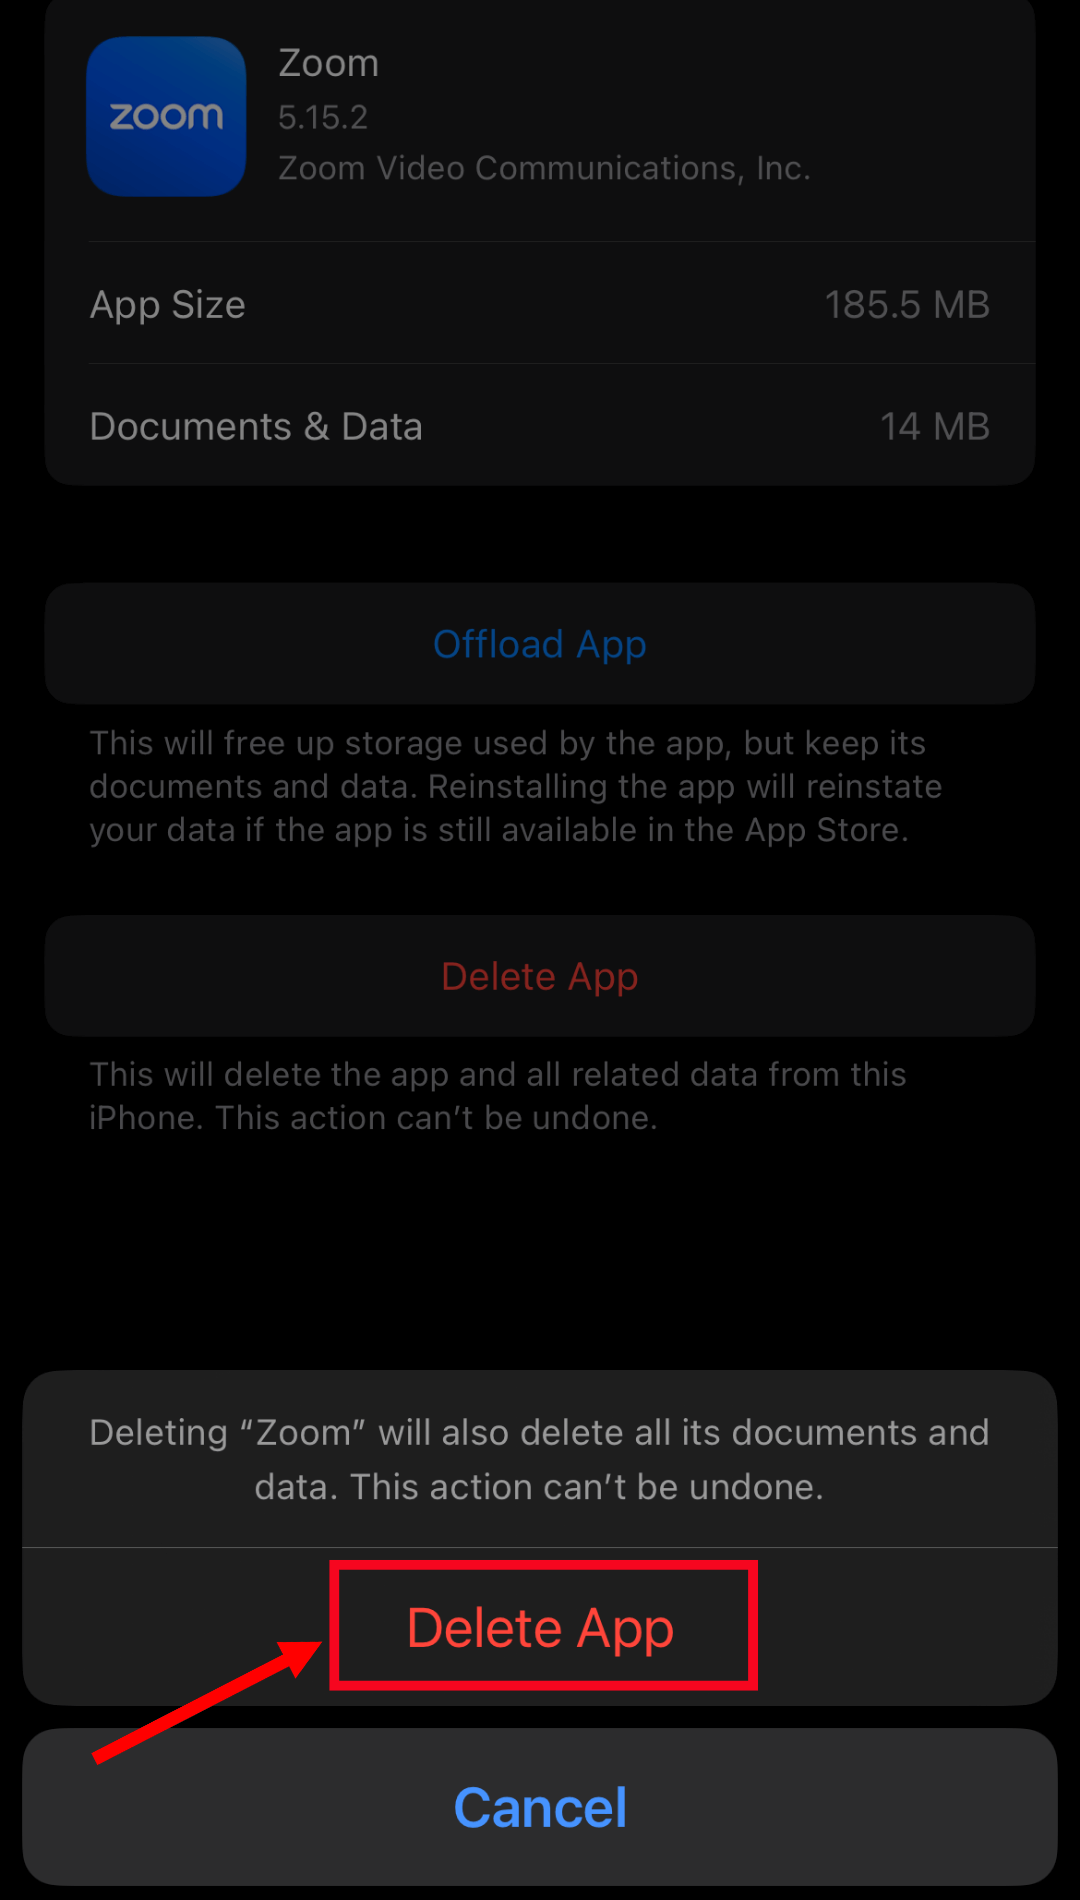 confirm the uninstallation by selecting delete app